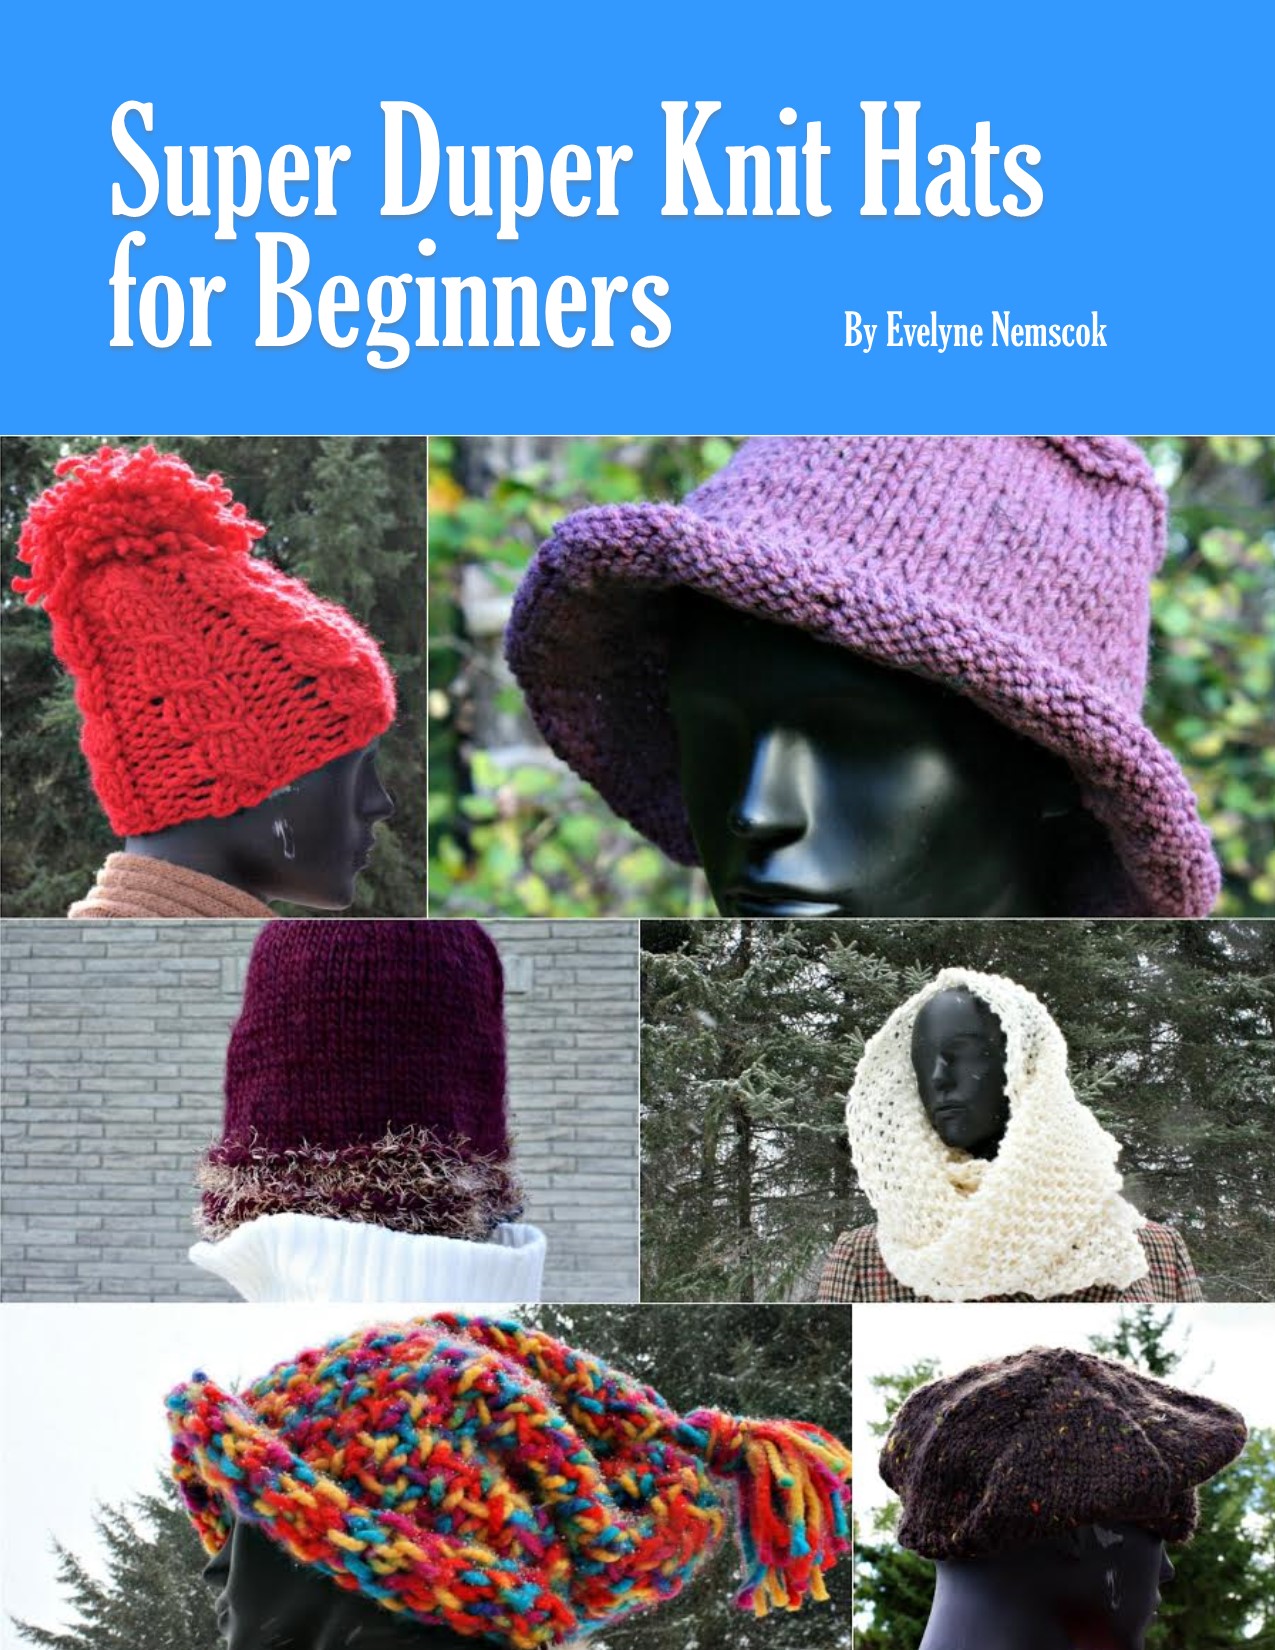 Super Duper Knit Hats for Beginners - book of fabulous knitting patterns for hat suited for beginners and professionals